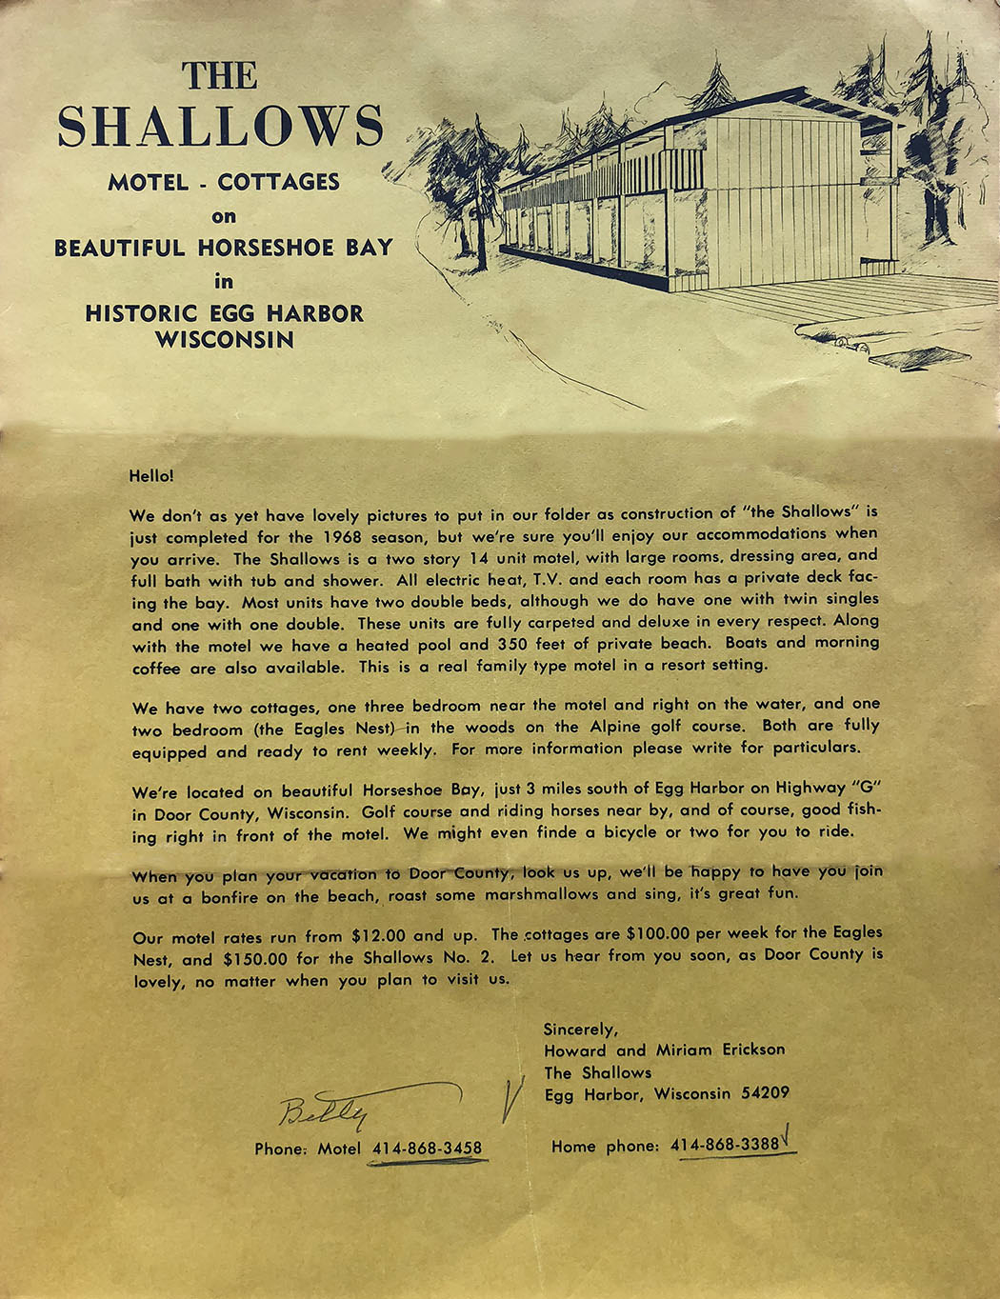 1968 letter from owners introducing the Shallows Resort